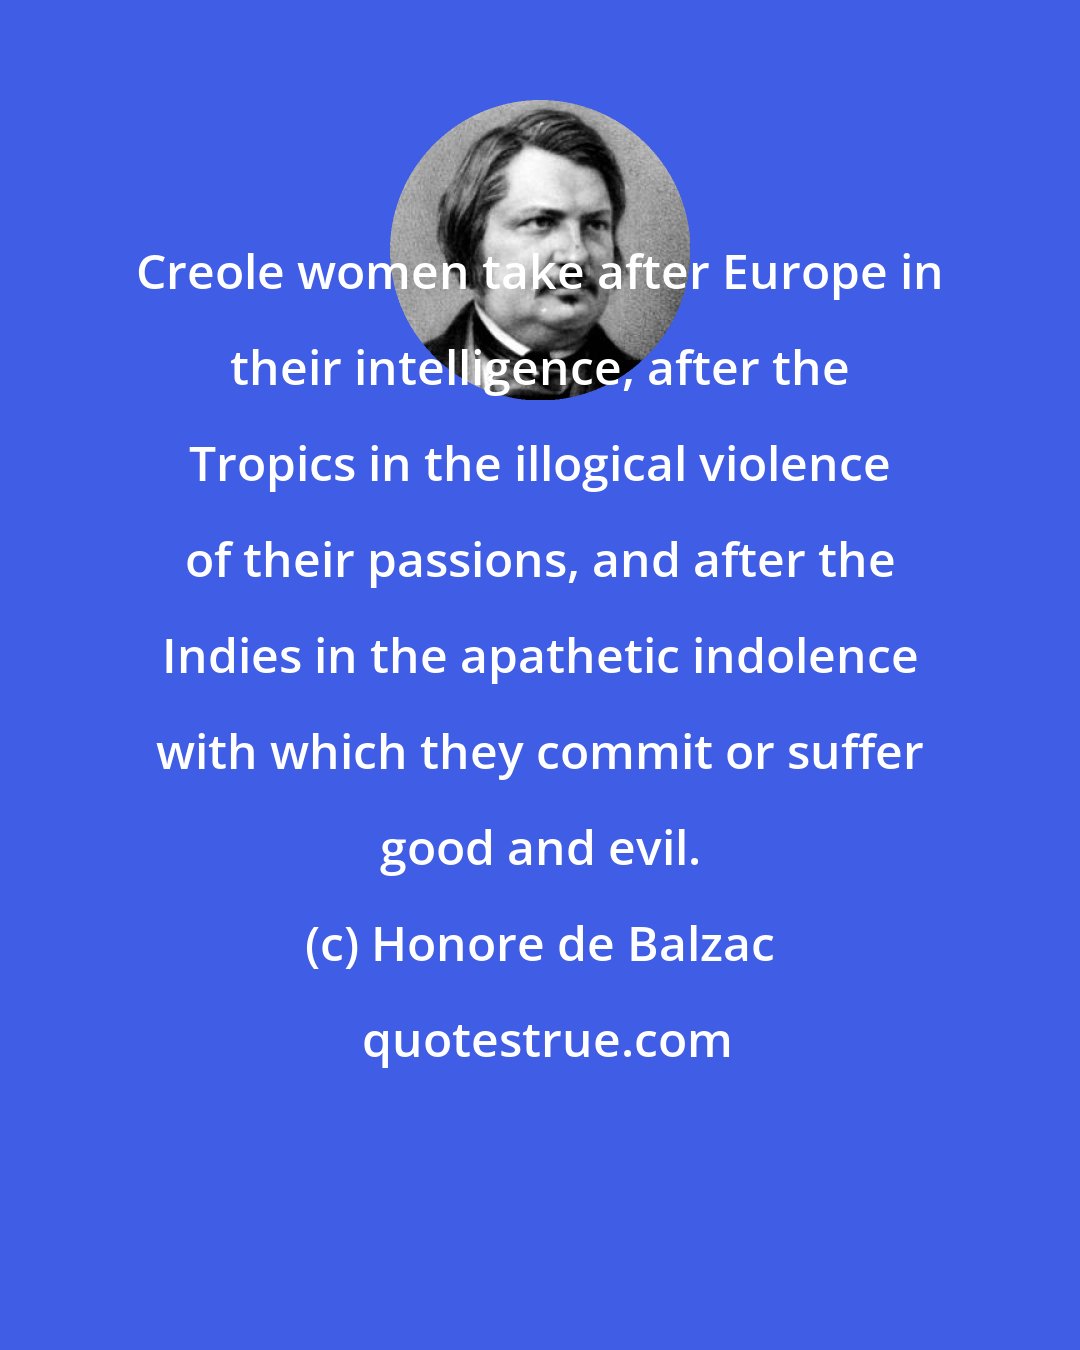 Honore de Balzac: Creole women take after Europe in their intelligence, after the Tropics in the illogical violence of their passions, and after the Indies in the apathetic indolence with which they commit or suffer good and evil.